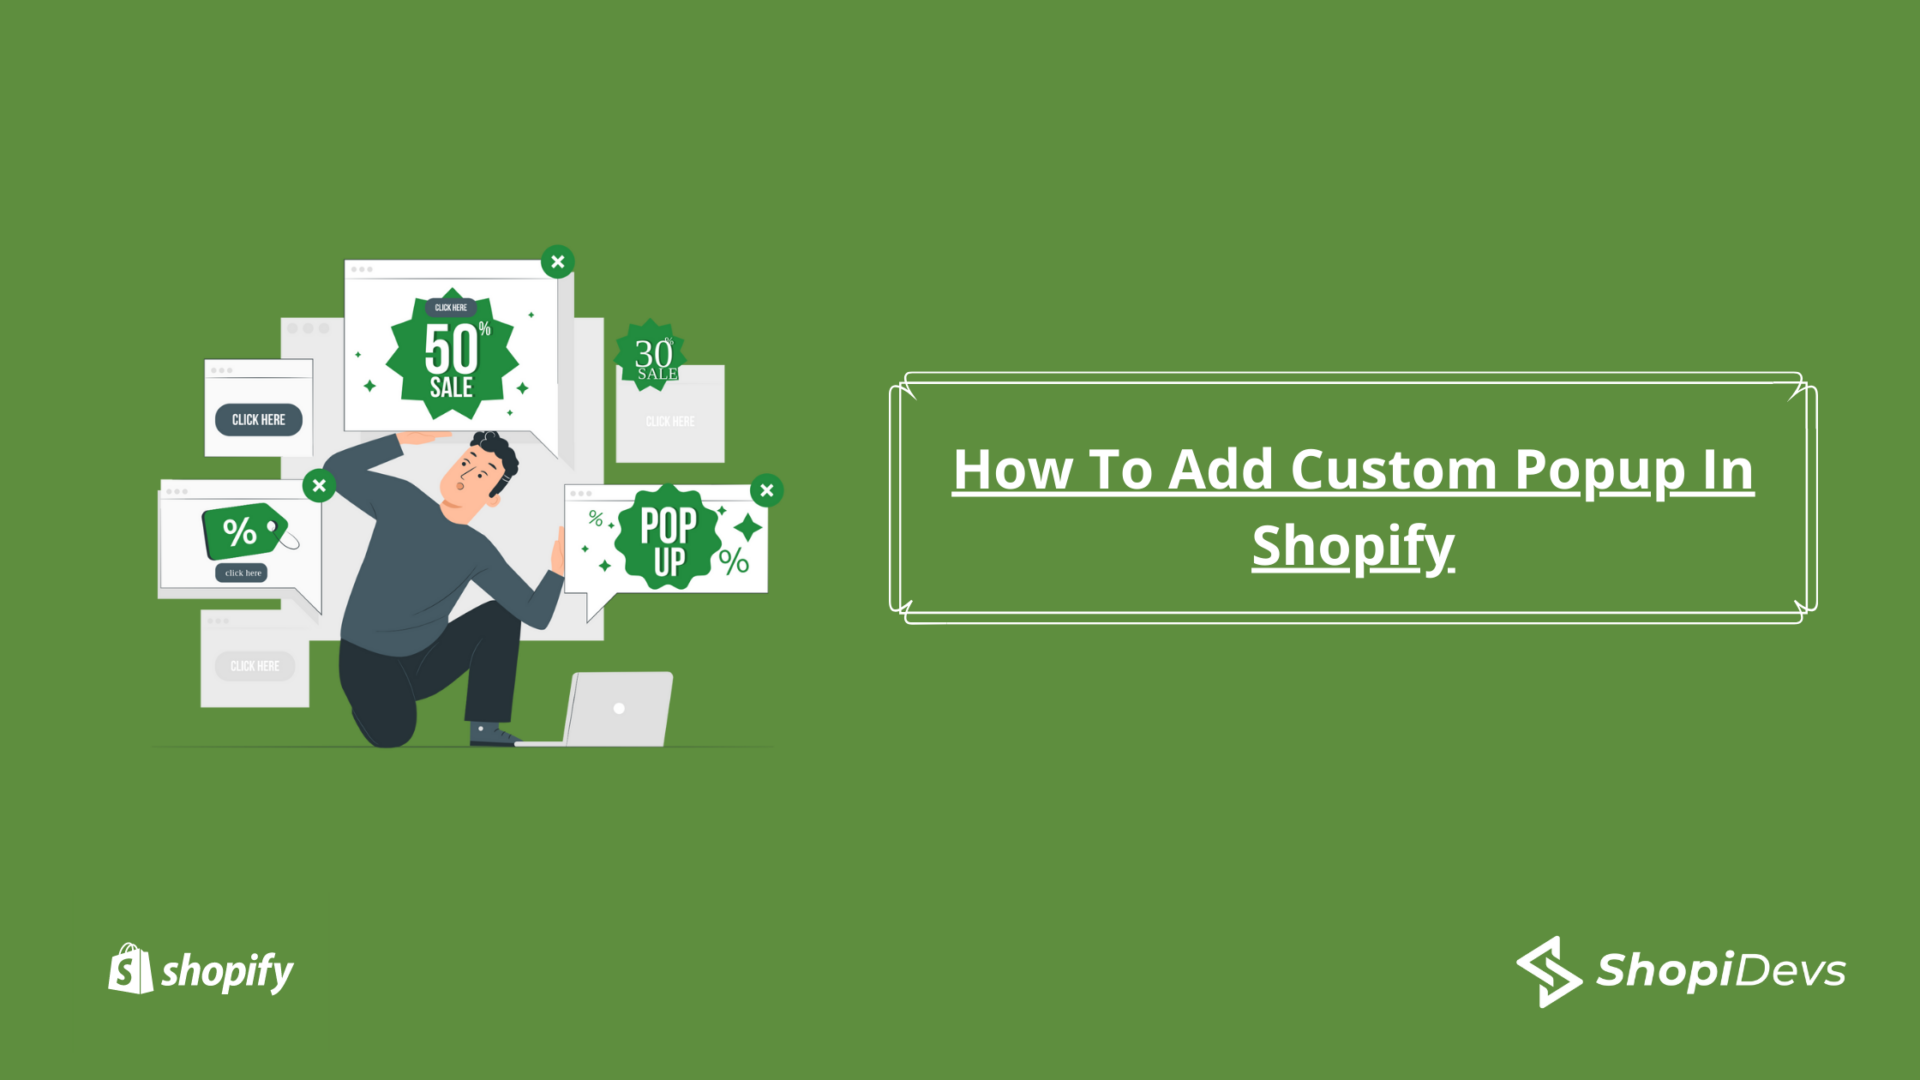 How To Add Custom Popup In Shopify